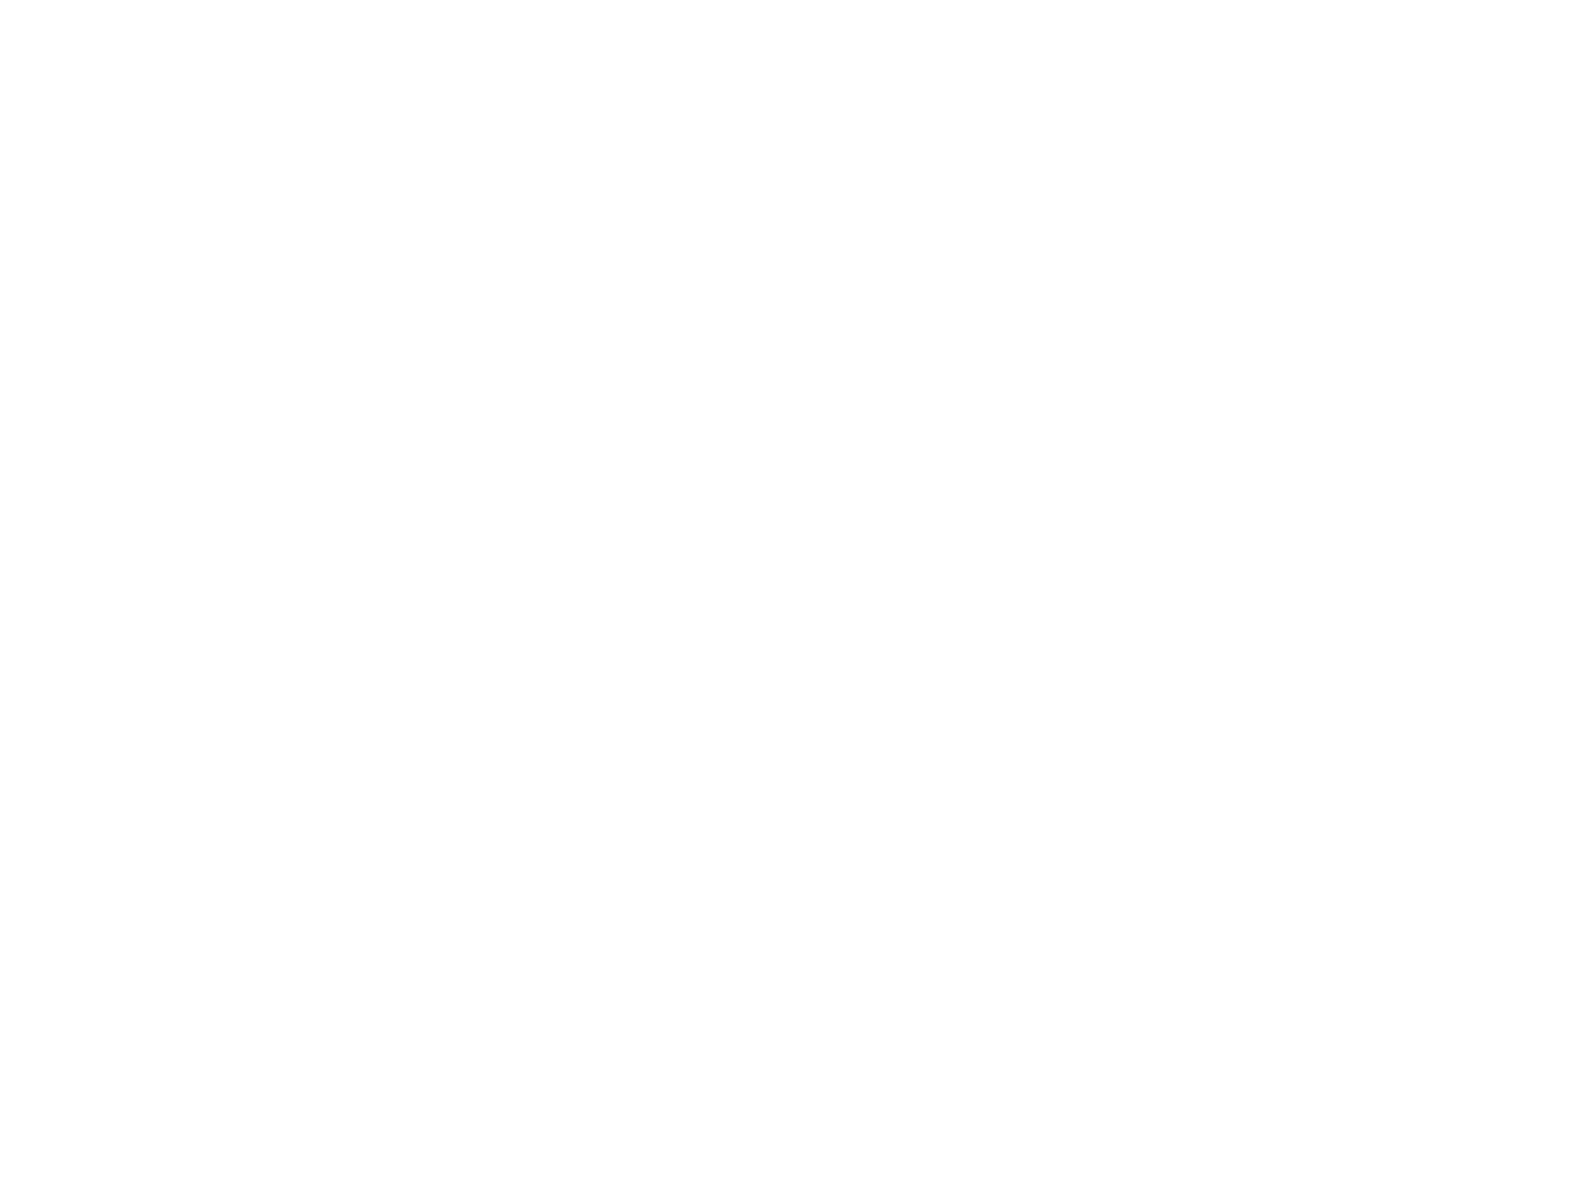 2023 Nonprofit Times Best Nonprofits to Work For Badge